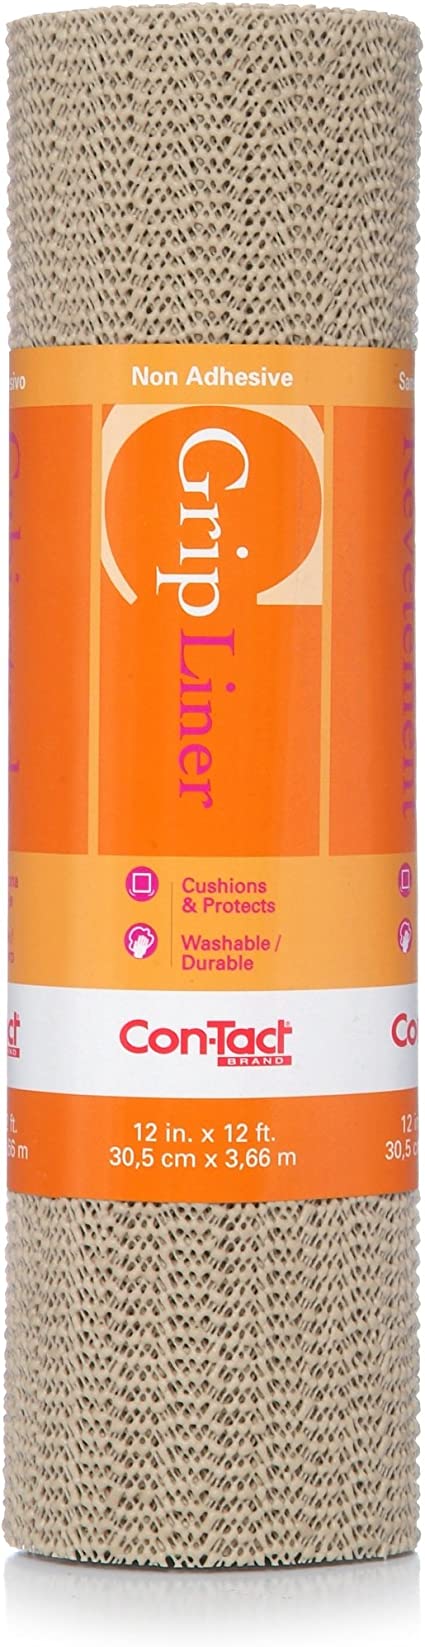 Con-Tact Brand Non-Adhesive Grip Shelf Liner, 12-Inch by 12-Feet, Taupe